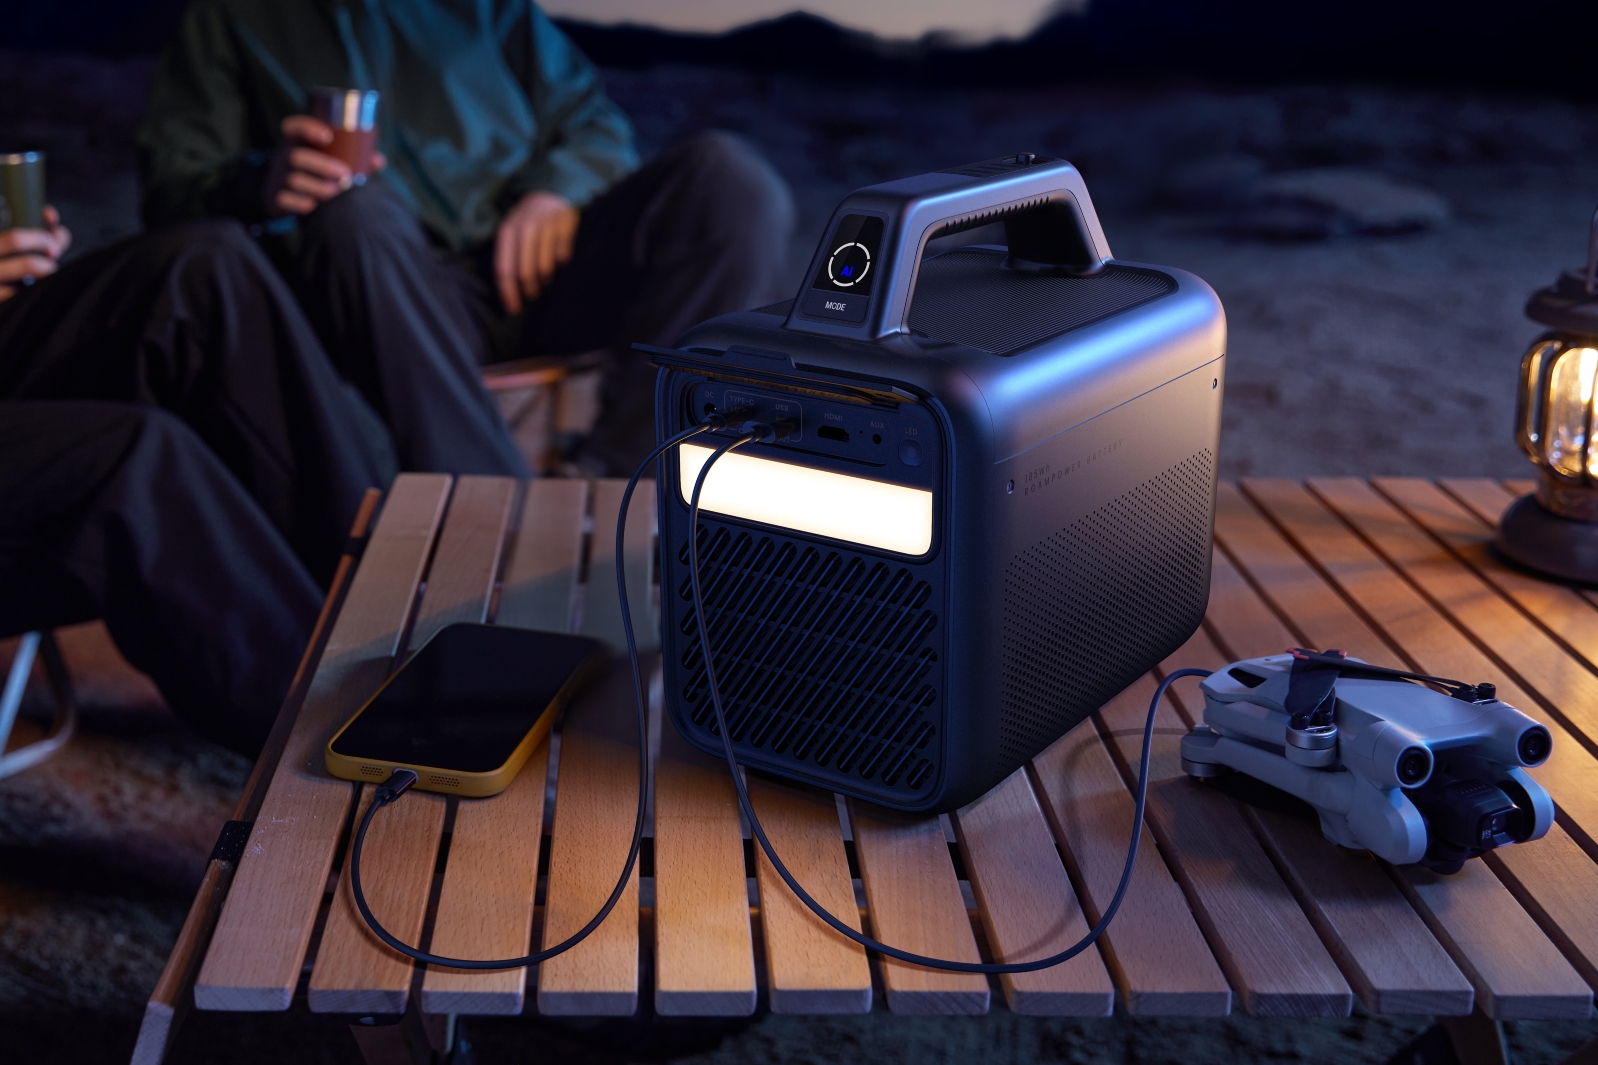 Anker's Nebula Mars 3 projector is bright and outdoor ready